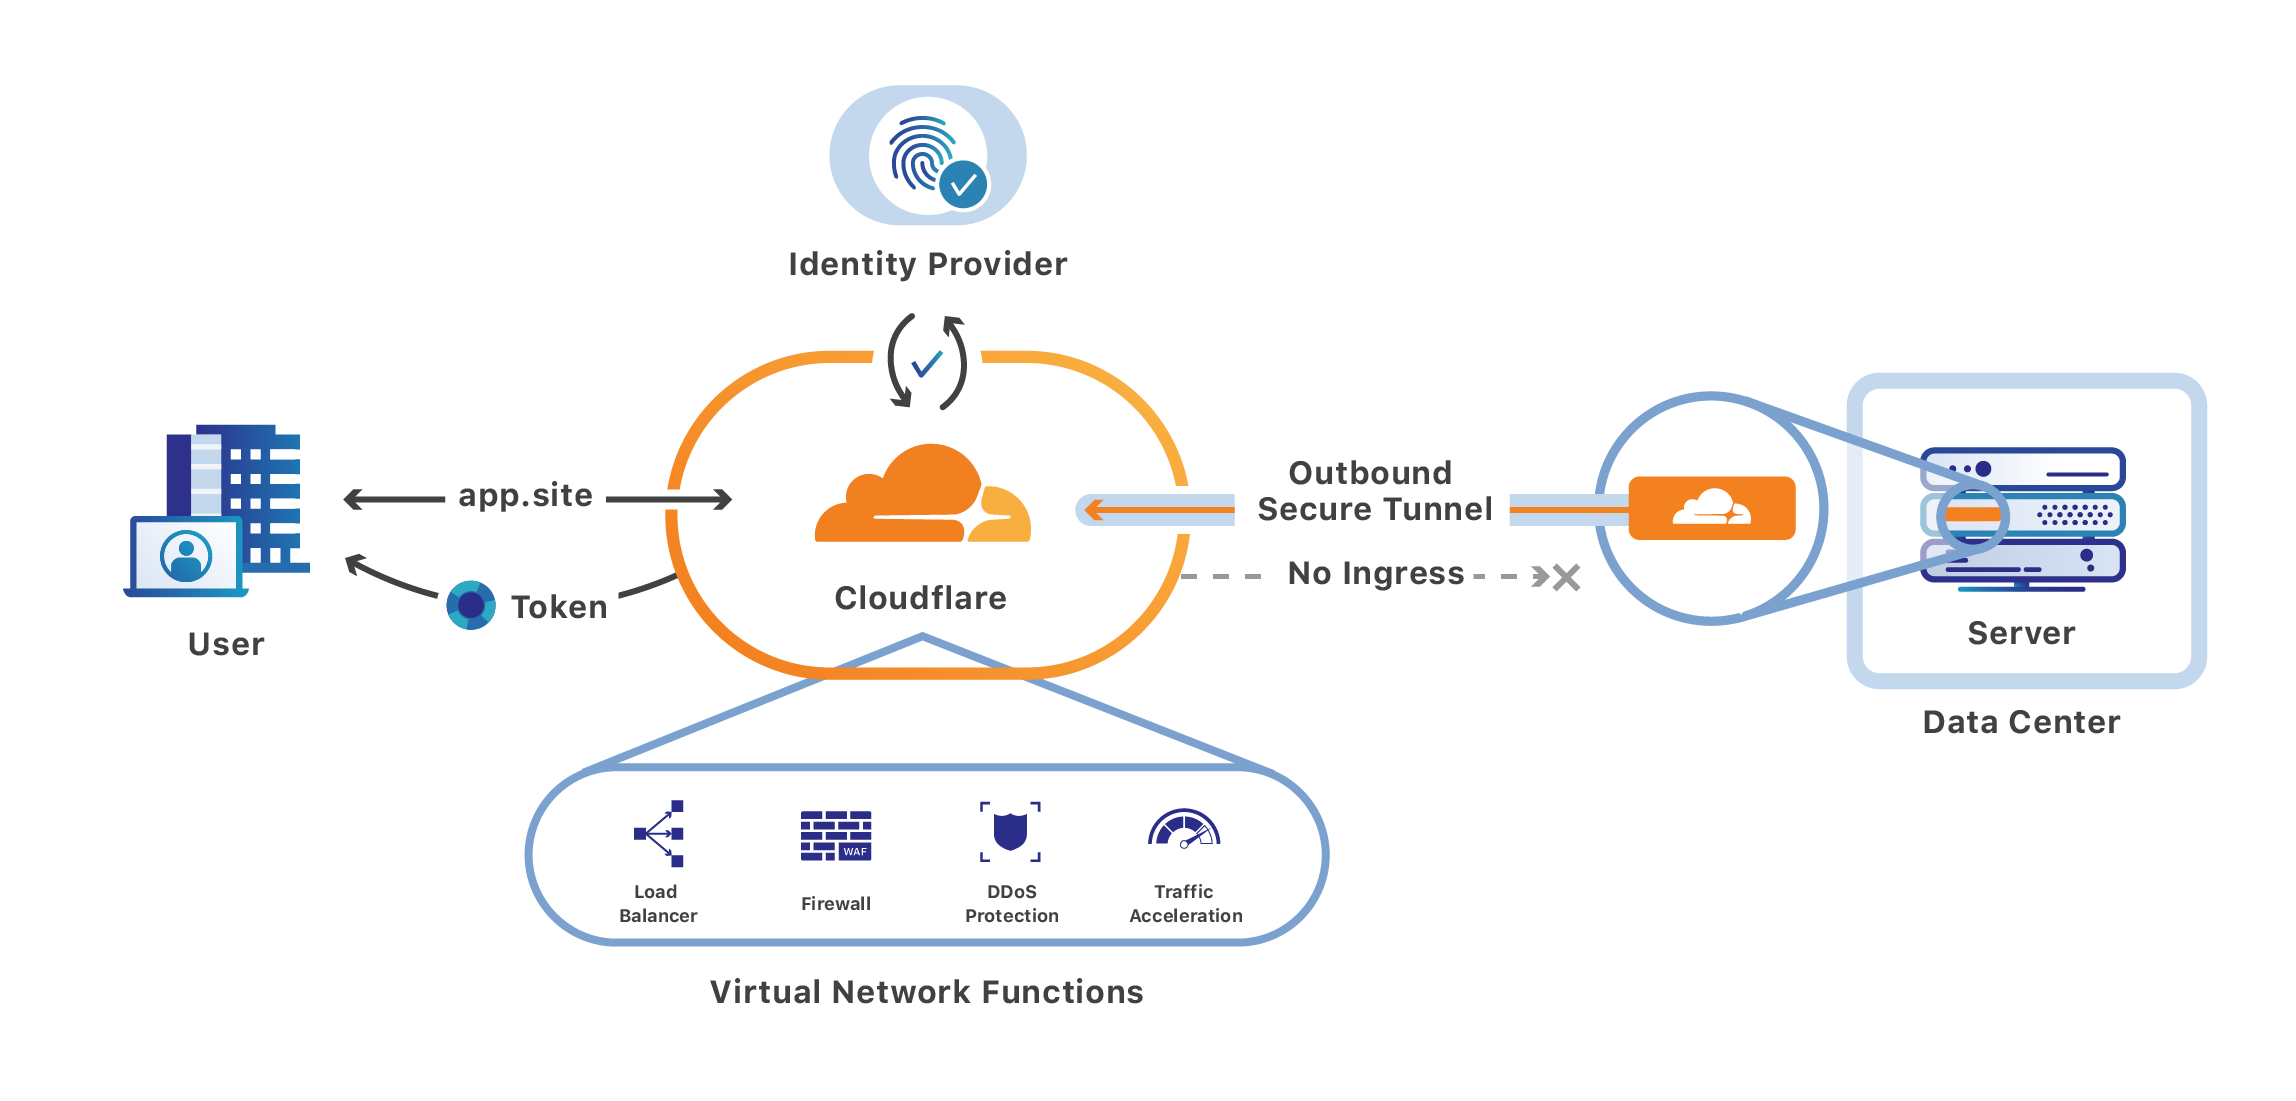 Why should you use Cloudflare Zero Trust Tunnel in a self-hosted environment